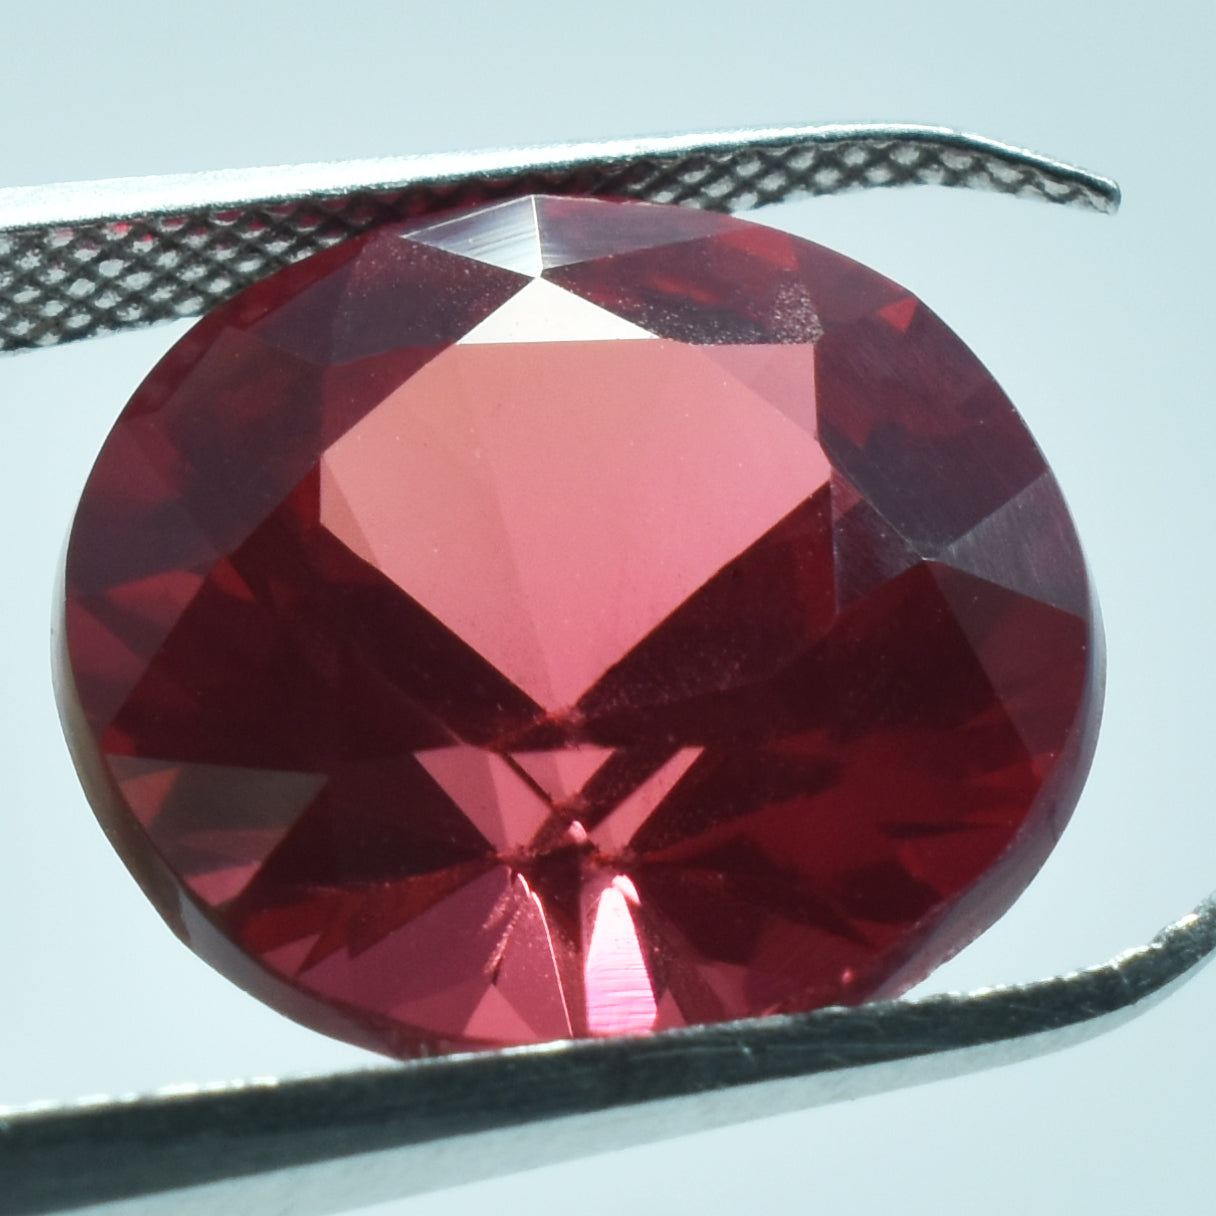 Jwelery Making Gemstone For Gift 8.65 Carat Beautiful Sapphire Gem Natural Padparadscha Sapphire A++ Quality Certified Loose Gemstone | Free Standard Delivery FREE Gift | Best Offer